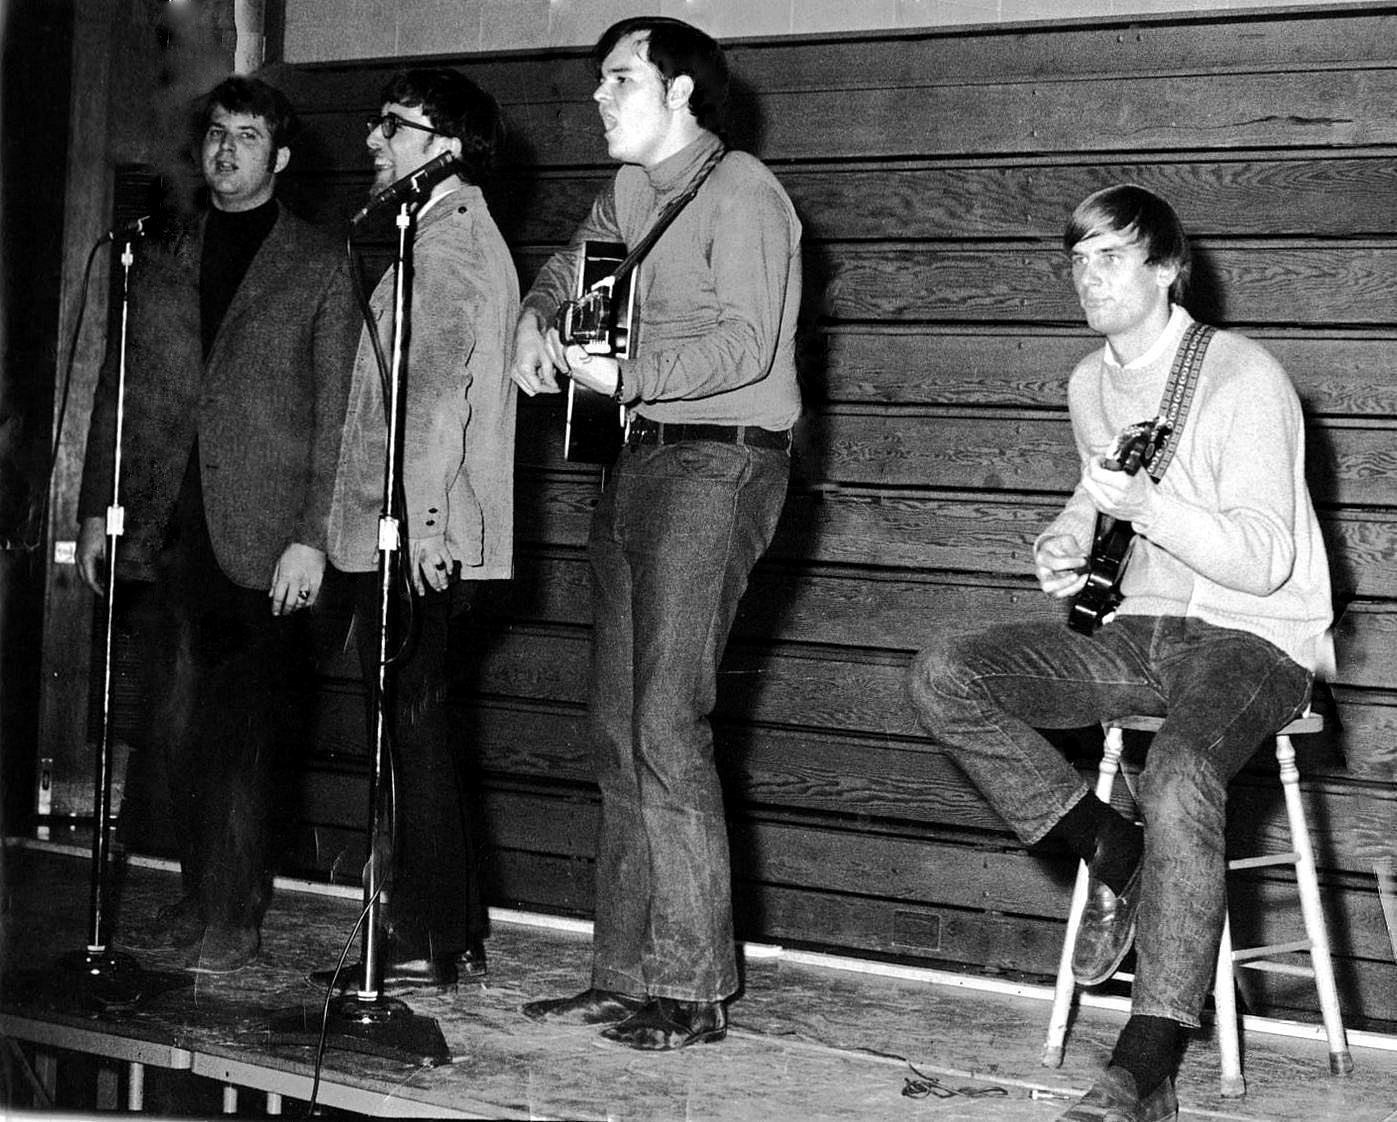 The Catchers of Wry performing at The Thirsty Ear Coffeehouse in Morristown, NJ, circa 1969.  Left to right: John Huemer, Marty Altner, Mike Donovan, Greg Smalley.